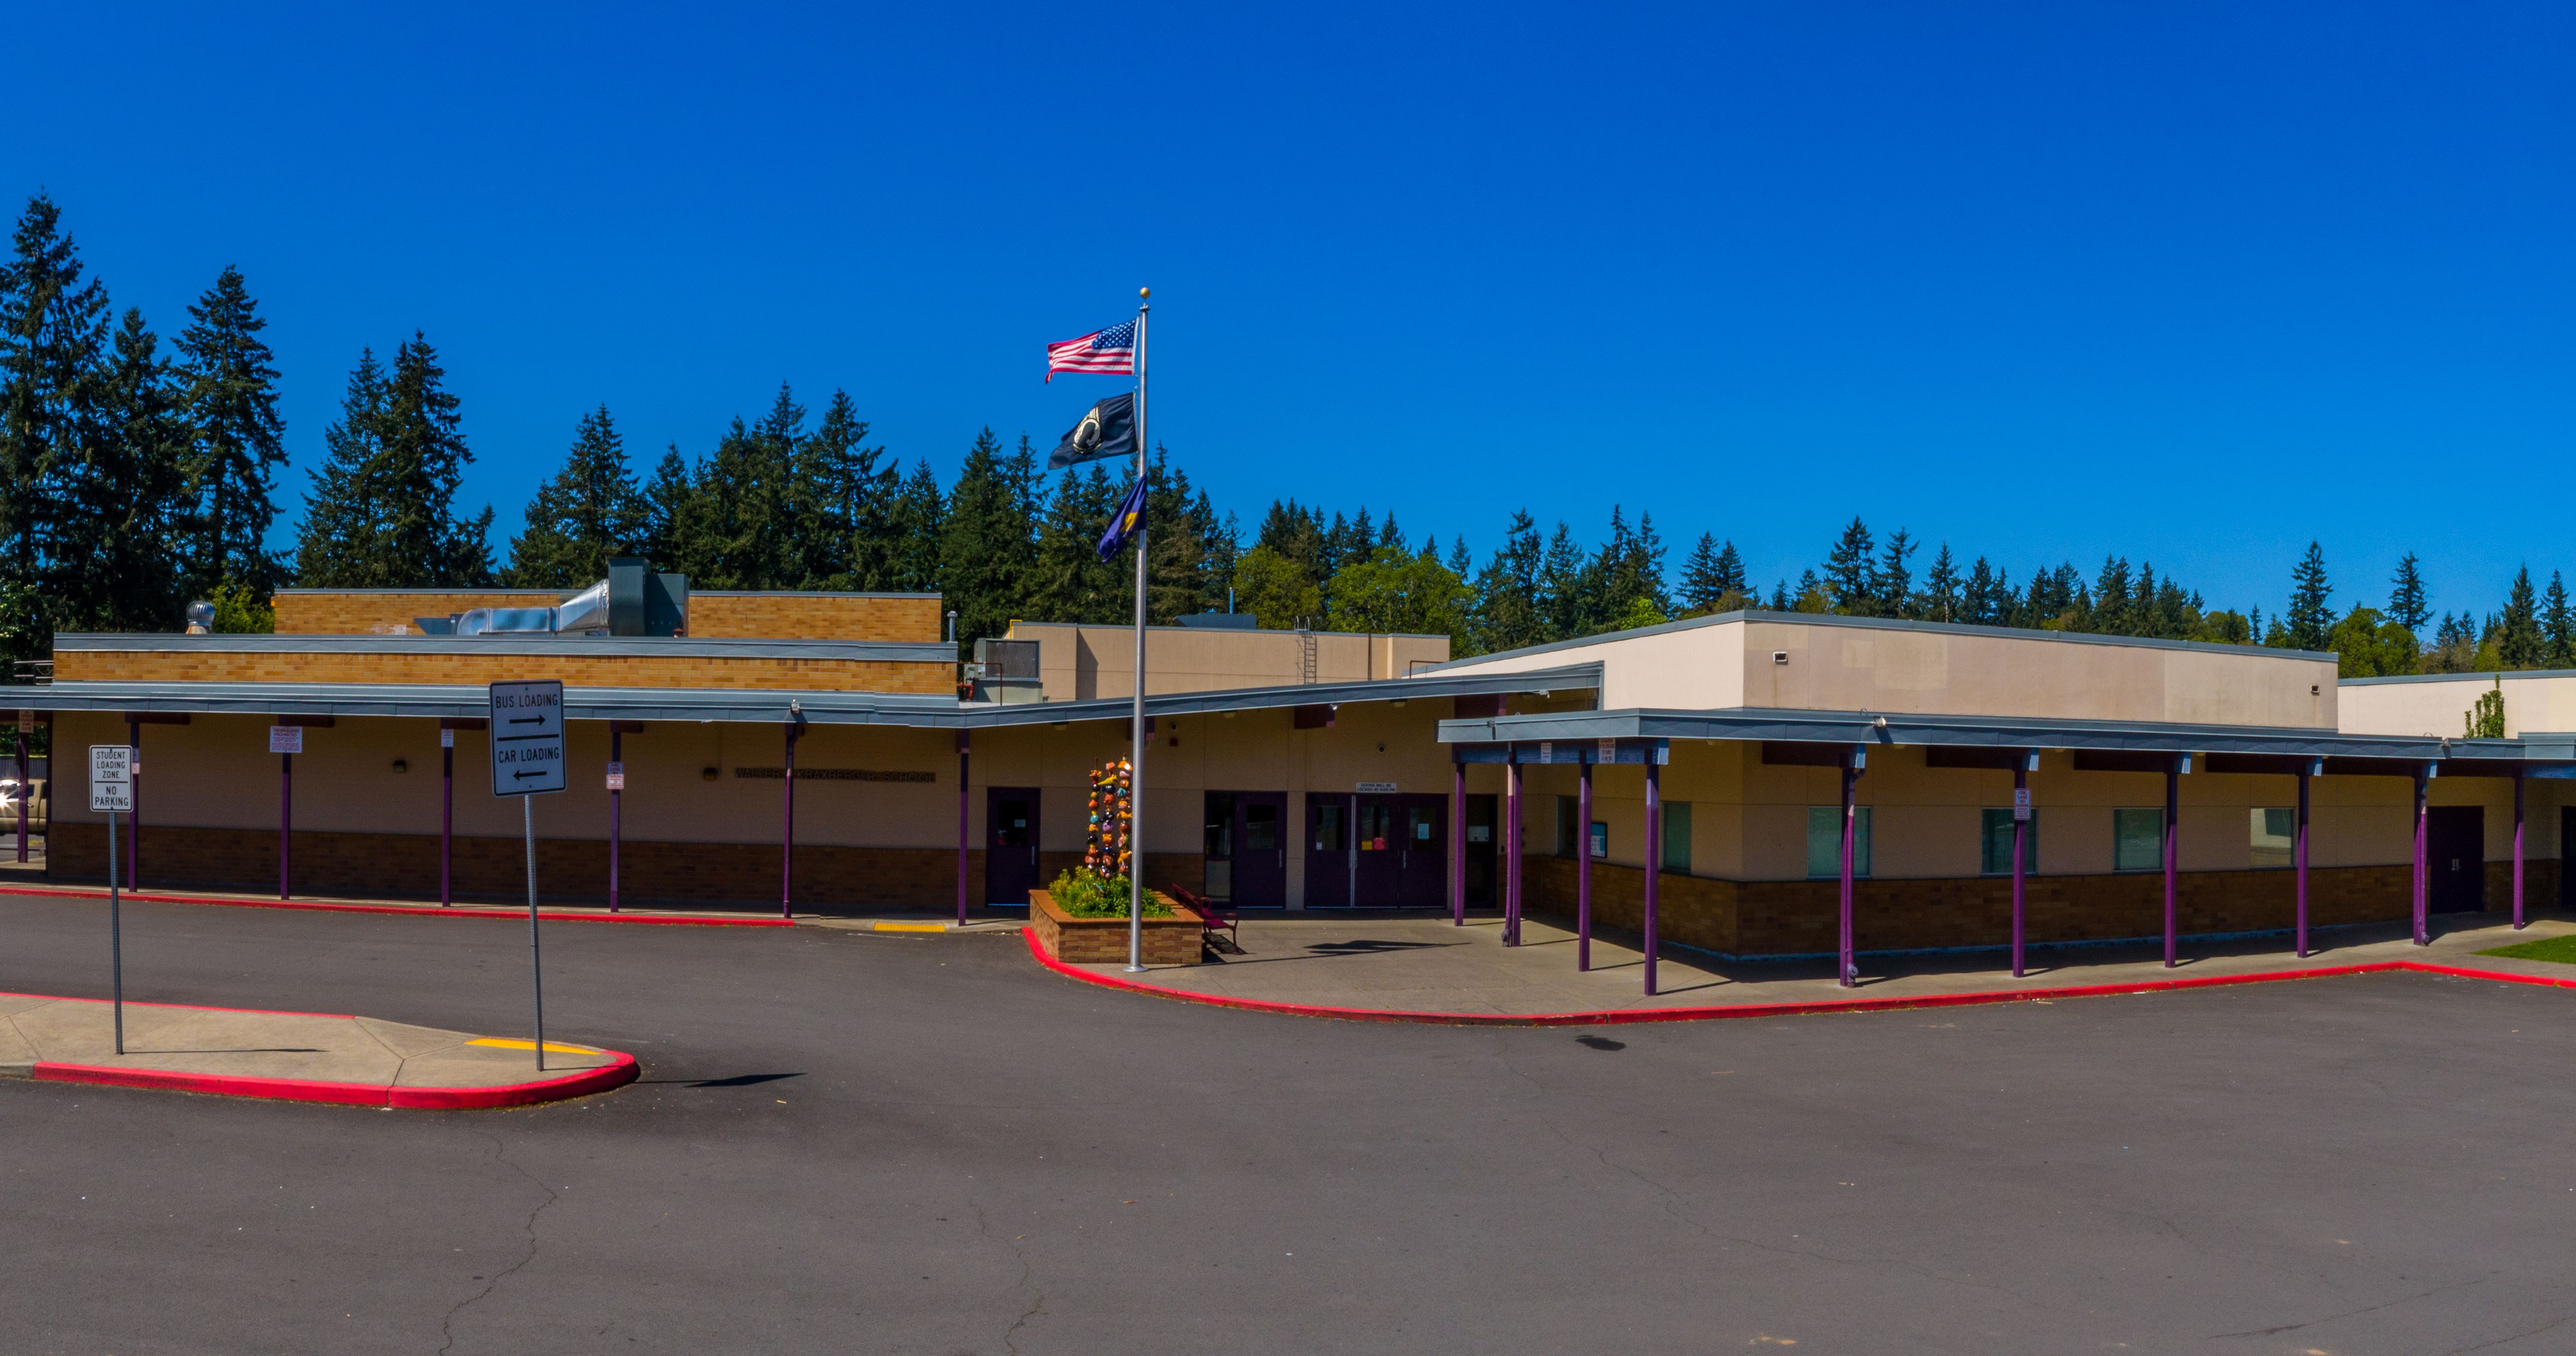 panoramic of wlk middle school front building with american flag waving and horizon